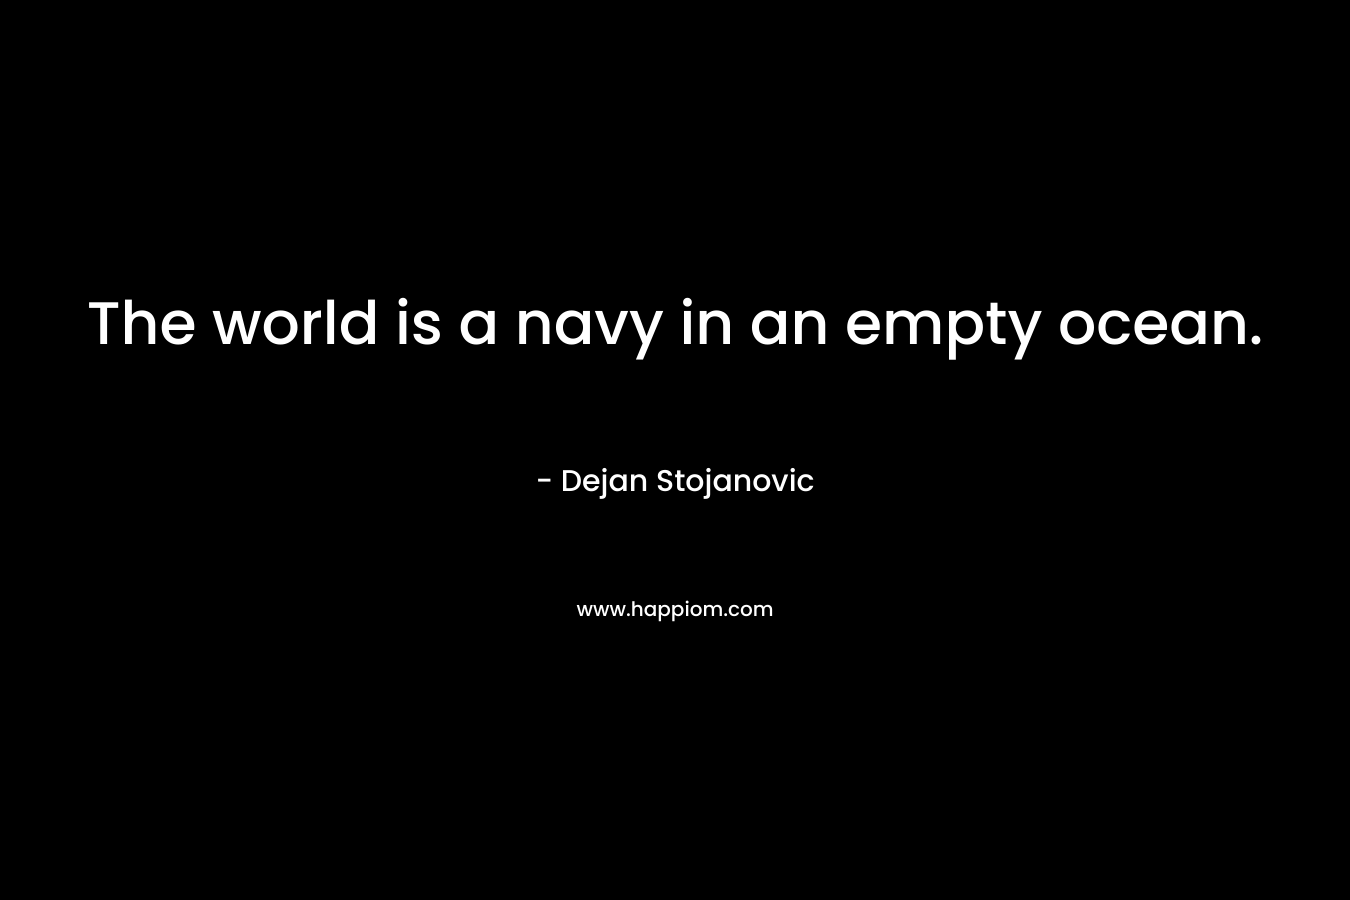 The world is a navy in an empty ocean.